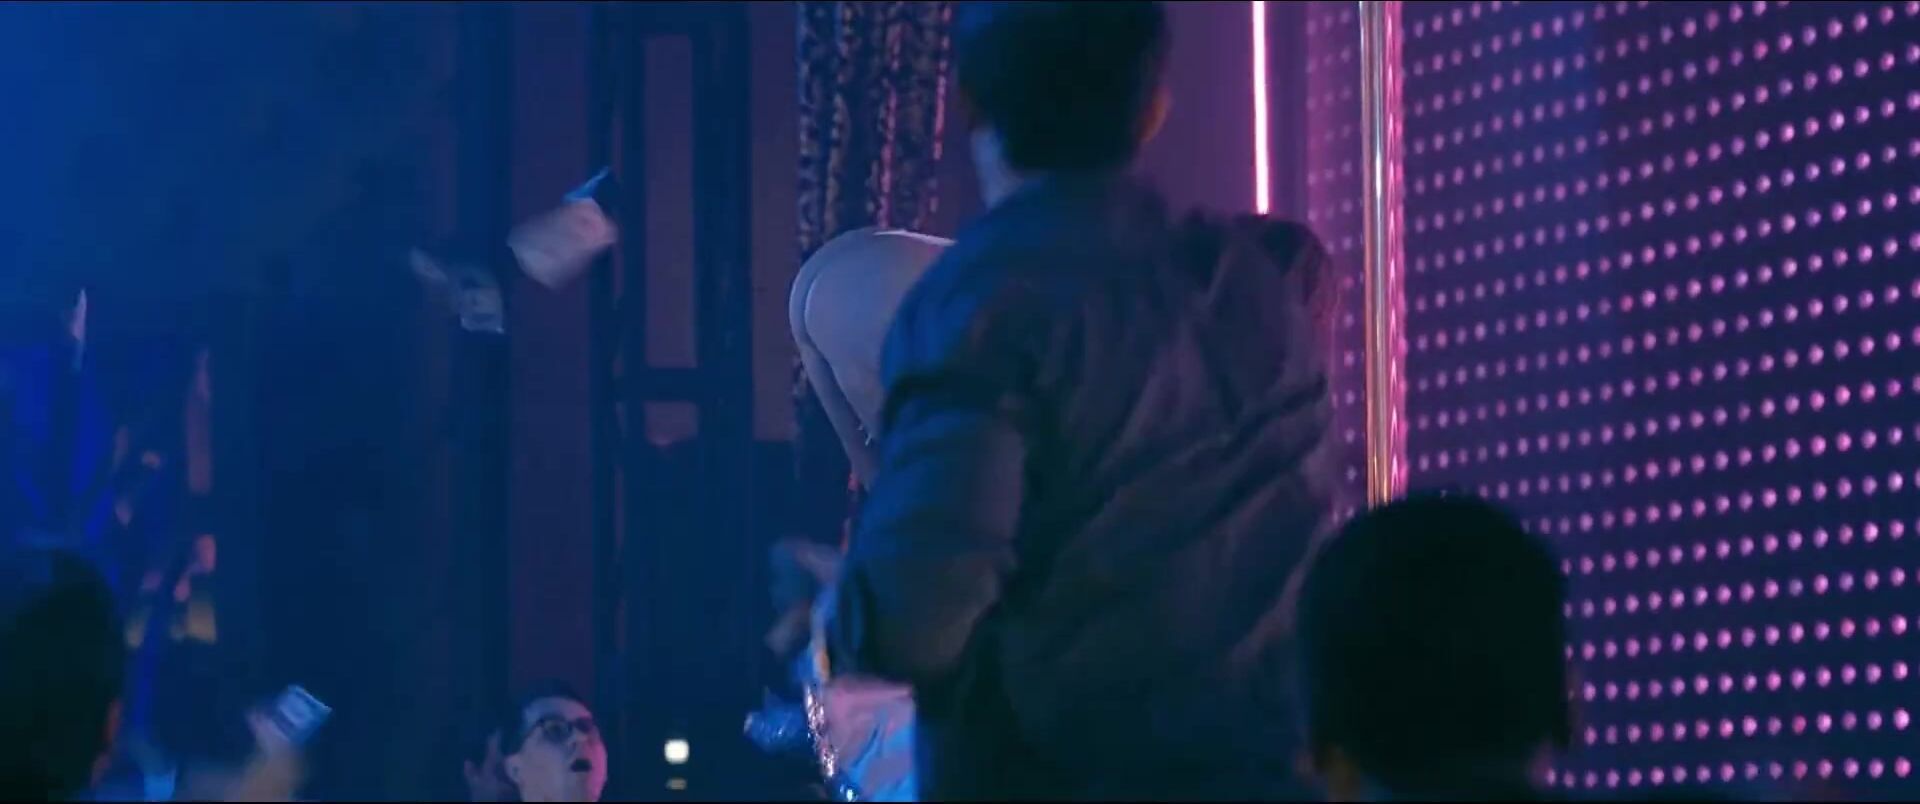 Royal-Cash Hot Latina and Eastern strippers Jennifer Lopez and Constance Wu nude in Hustlers (2019) Pervert